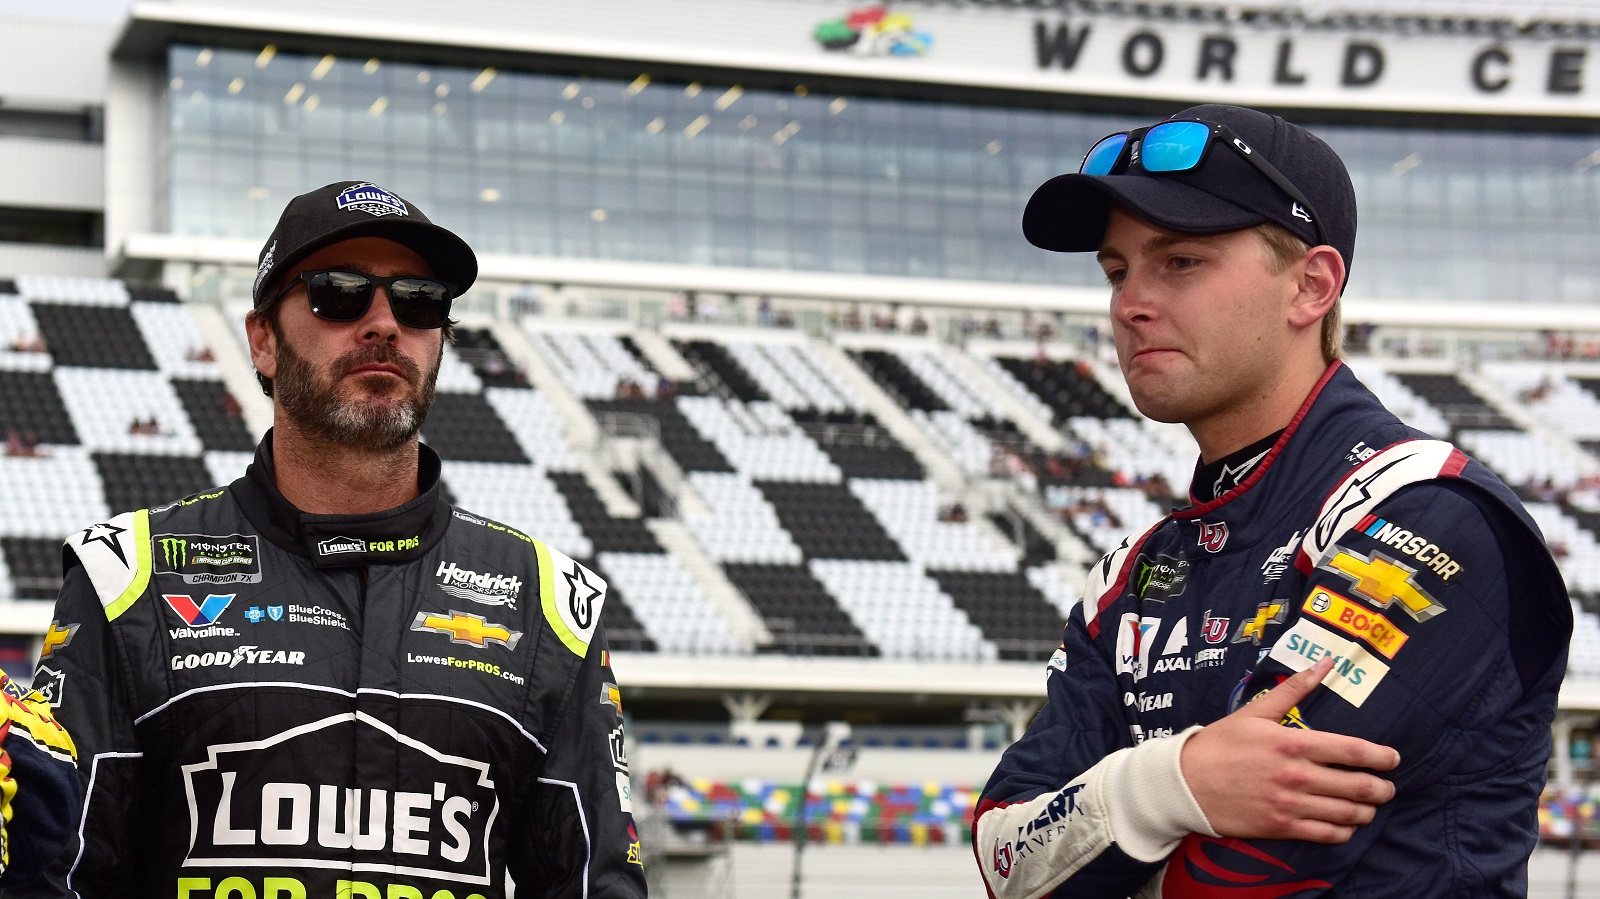 Jimmie Johnson and  William Byron talk during qualifying for the Monster Energy NASCAR Cup Series Coke Zero Sugar 400 at Daytona International Speedway on July 6, 2018. | Jared C. Tilton/Getty Images